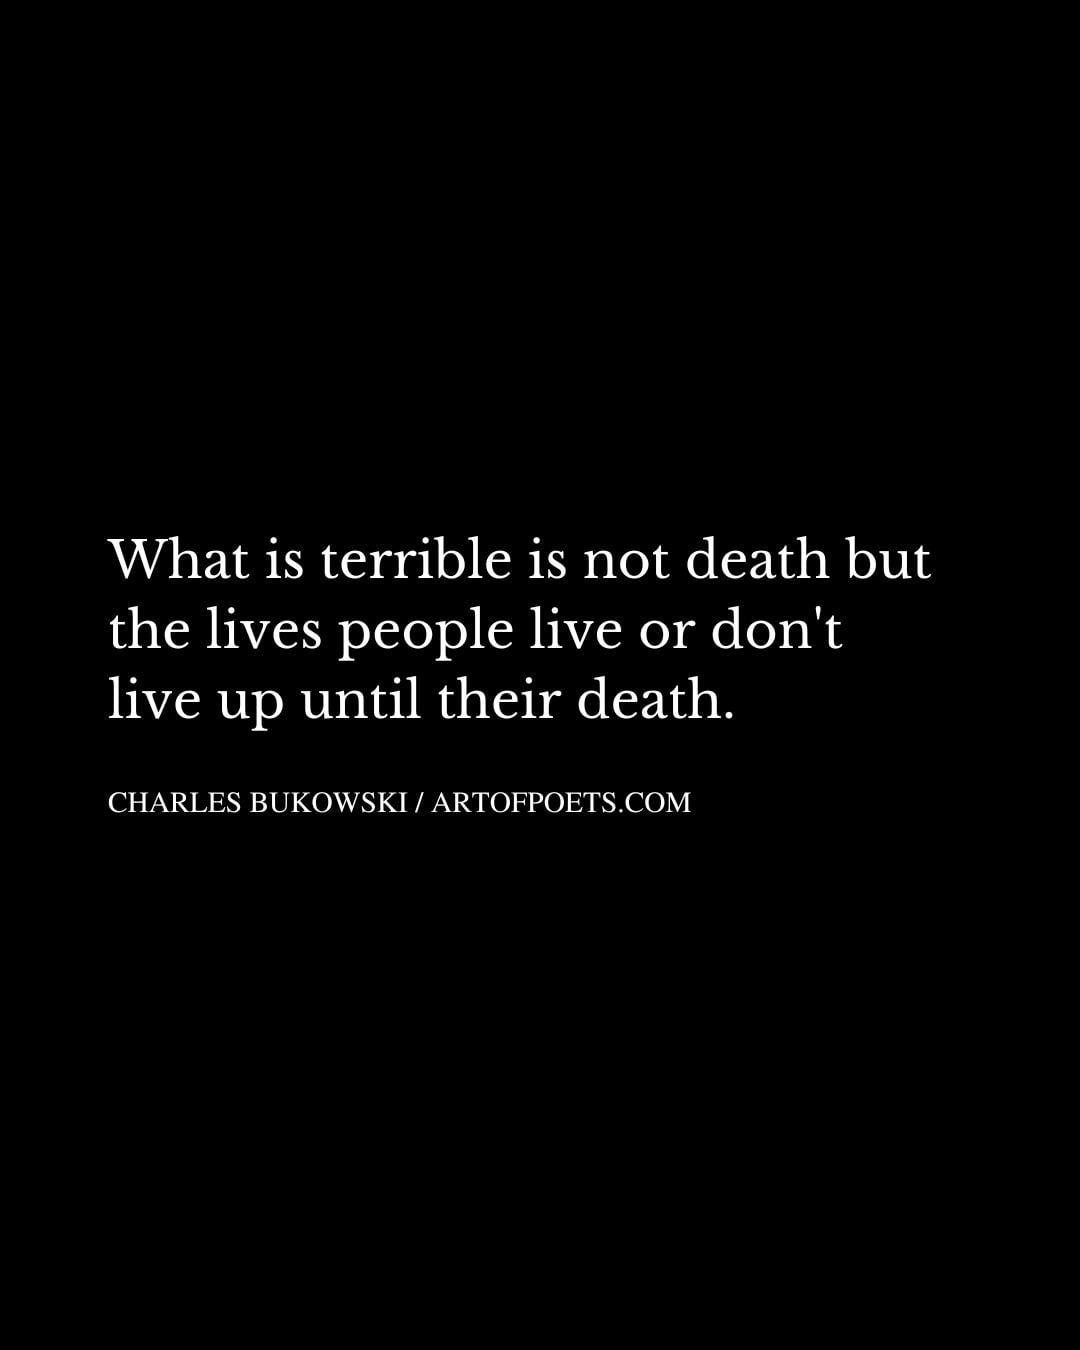 What is terrible is not death but the lives people live or dont live up until their death